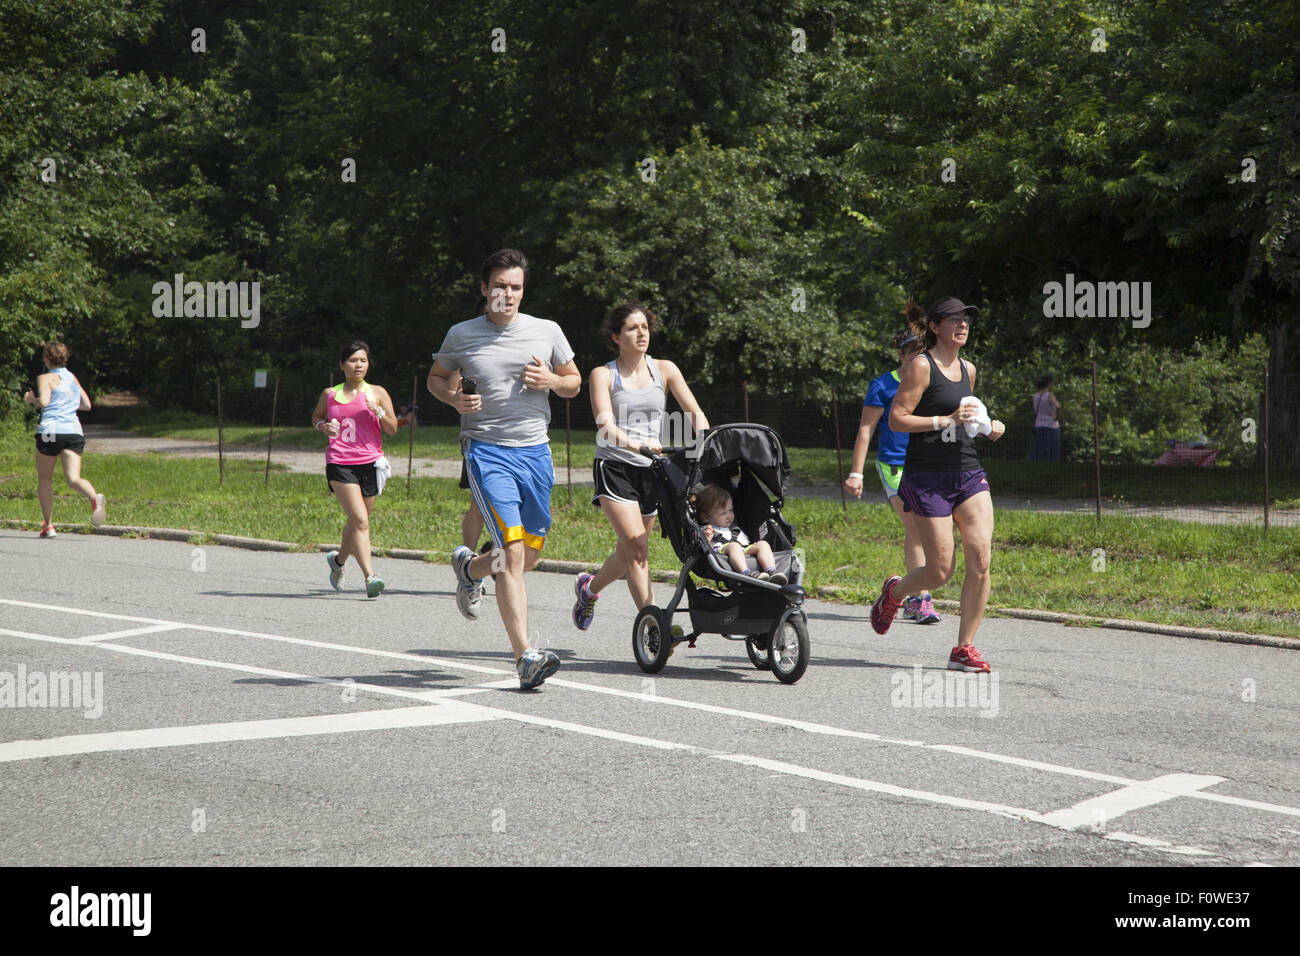 People make jogging for health a family affair in Prospect Park, Brooklyn, NY. Stock Photo